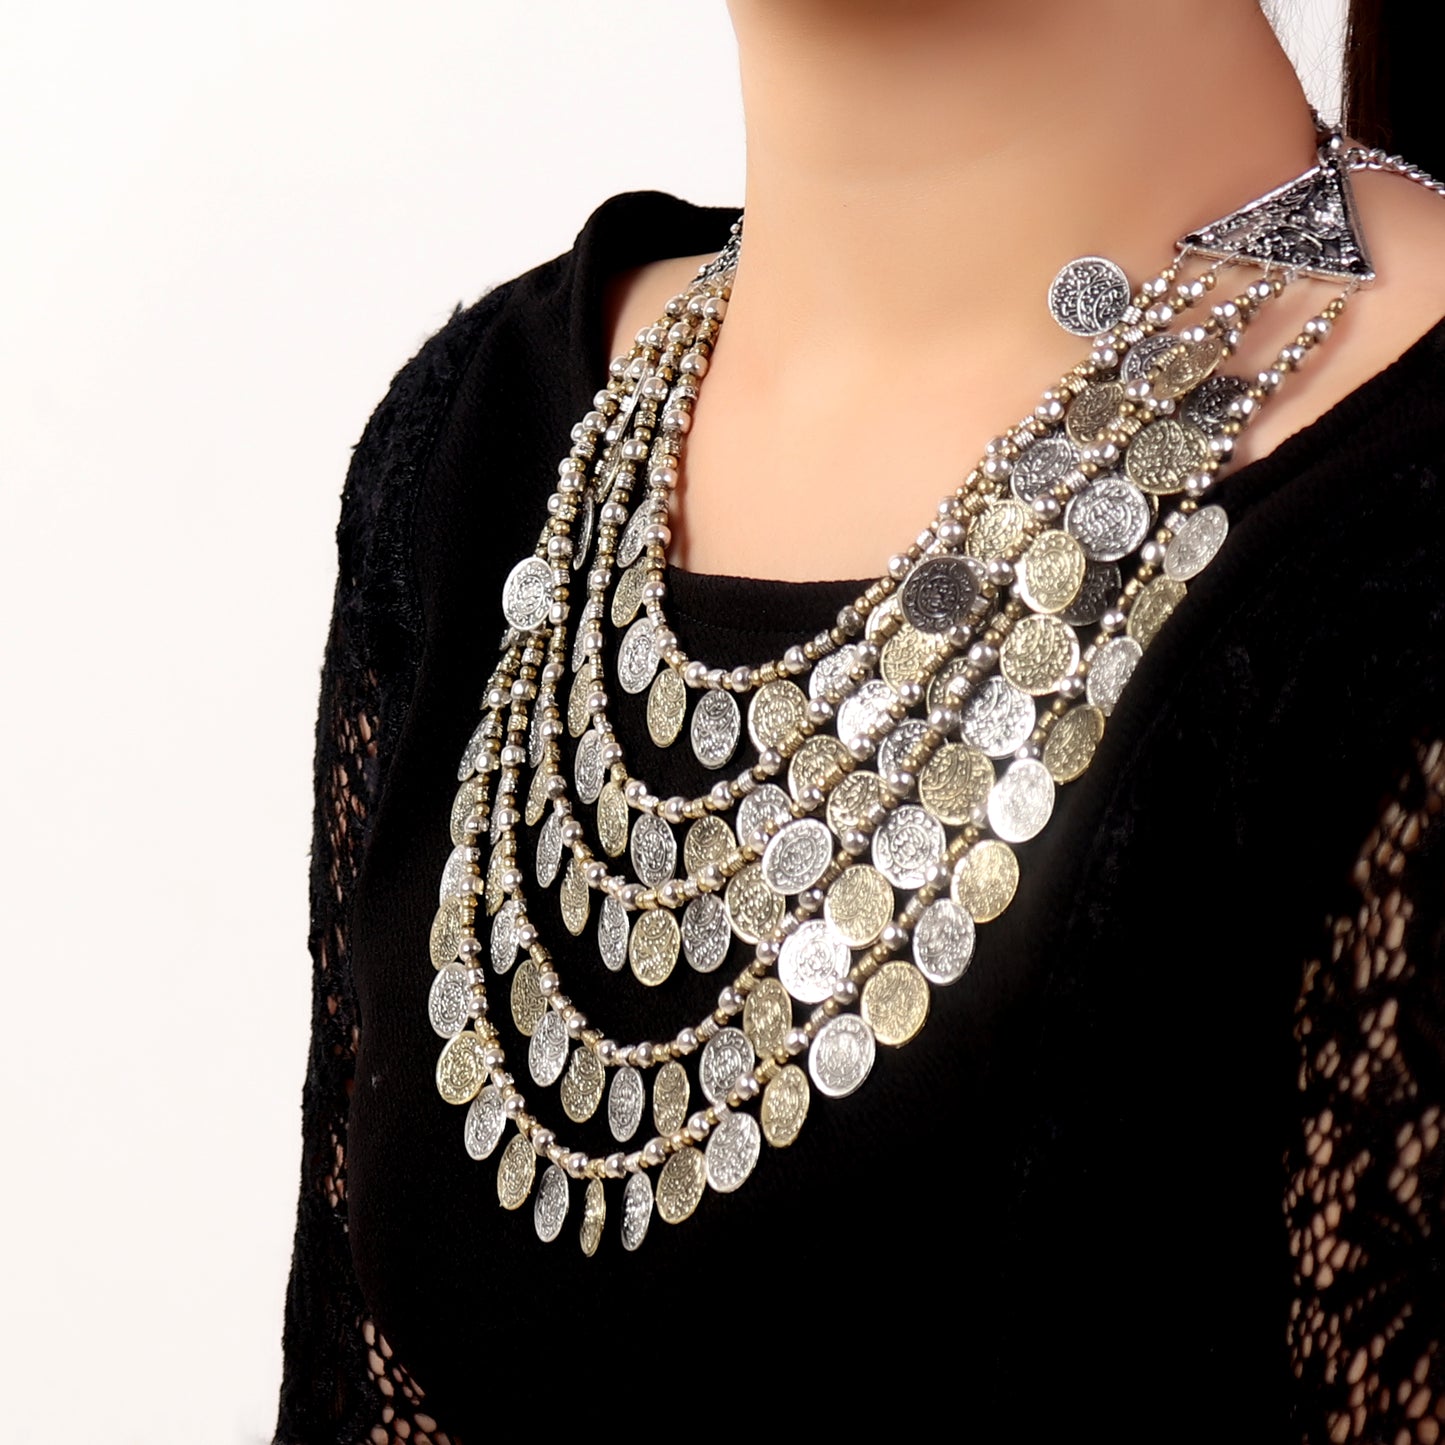 Necklace,Layered Coin Necklace - Cippele Multi Store